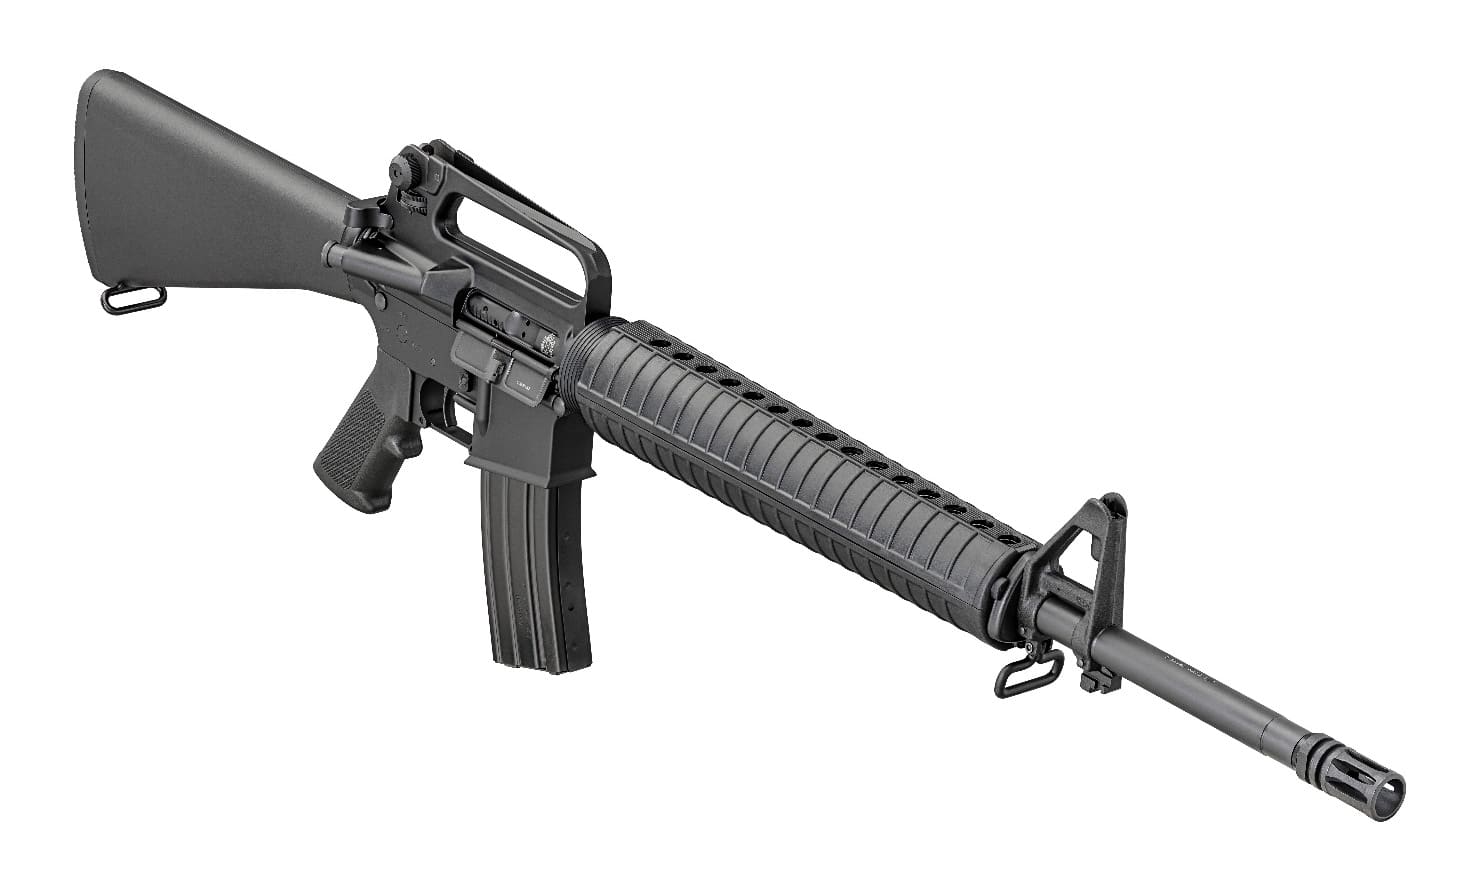 The Springfield Armory SA-16A2 is the same as a Springfield SA-16A2. IT is a semi-automatic rifle chambered for the 5.56x45mm NATO cartridge. It uses STANAG magazines and is based on the M16A2 assault rifle.